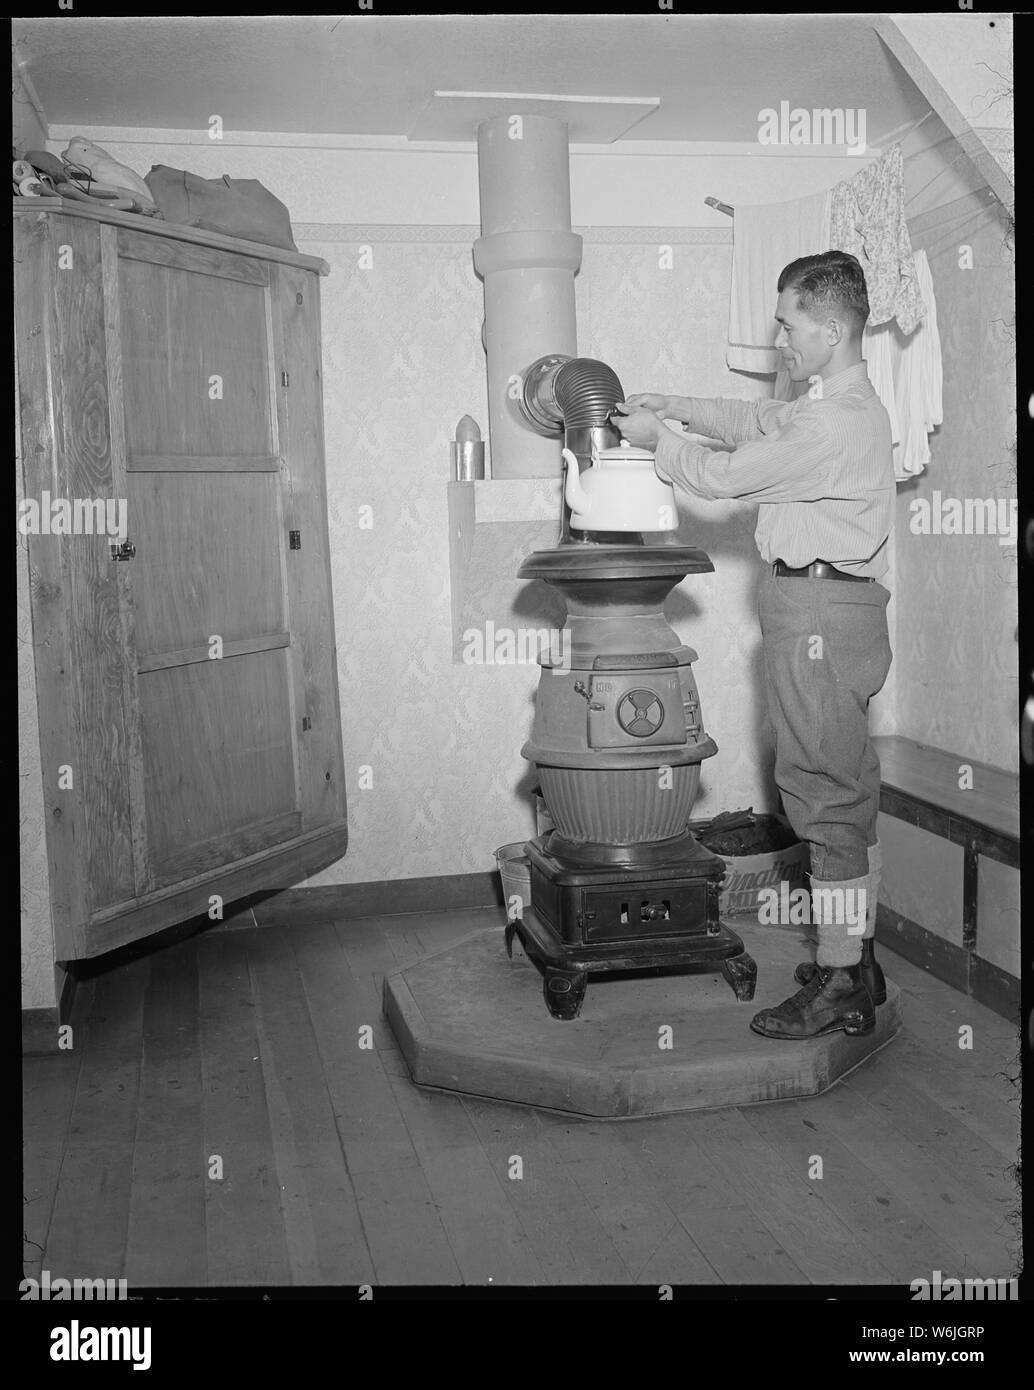 Minidoka Relocation Center. Eizo Nishi. View in the home of Eizo Nishi. The pot bellied stove sho . . .; Scope and content:  The full caption for this photograph reads: Minidoka Relocation Center. Eizo Nishi. View in the home of Eizo Nishi. The pot bellied stove shown in this photo burns coal and provides ample heat. Stock Photo